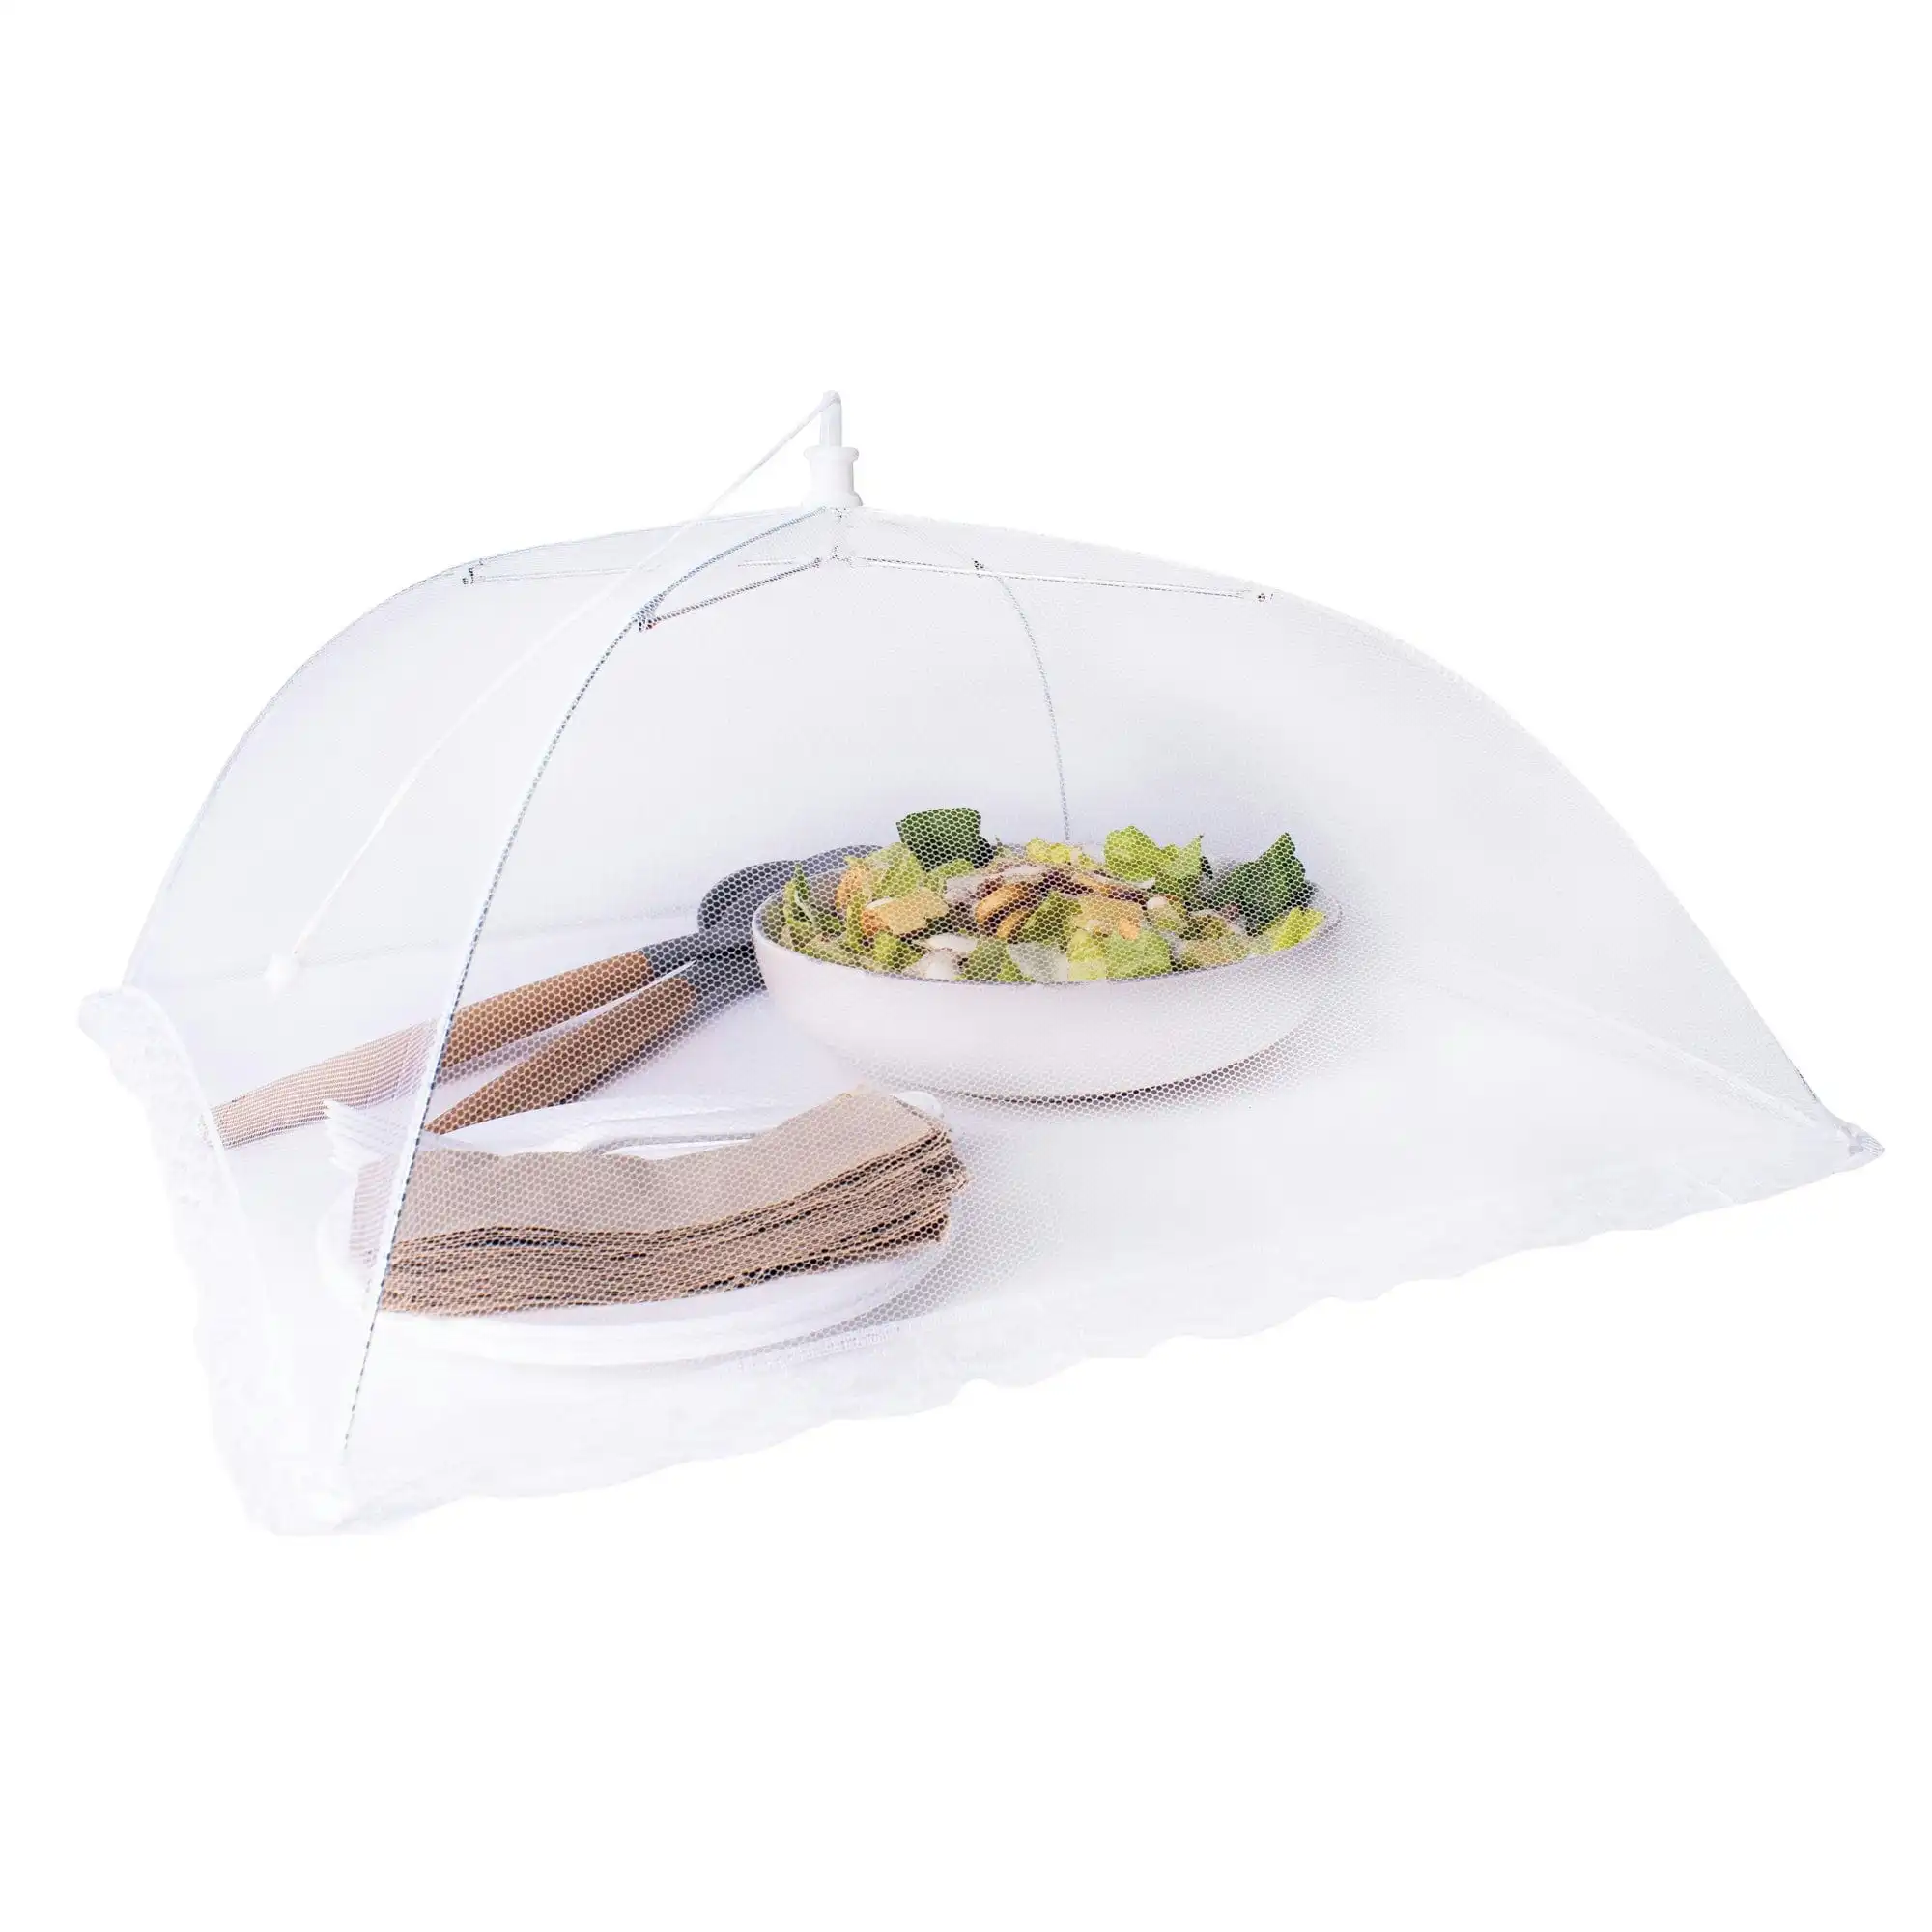 37cm Square Pop-up Mesh Food Cover